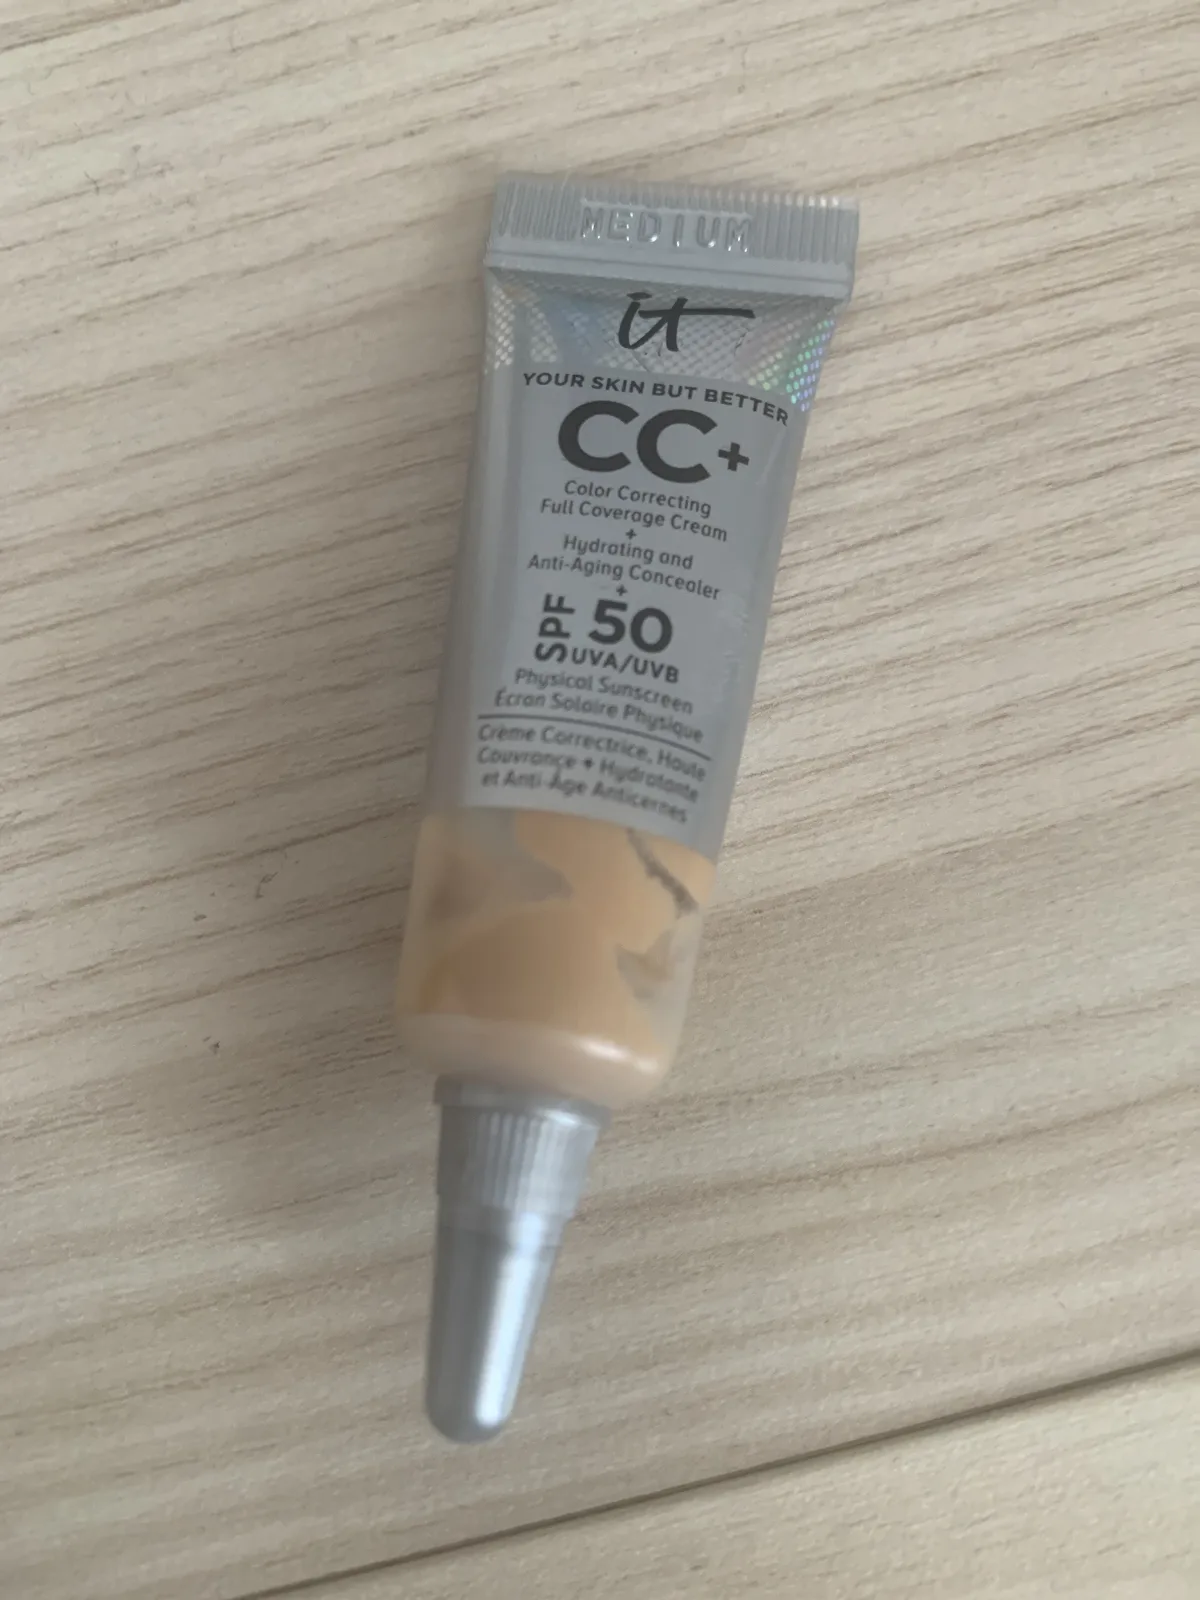 CC Cream It Cosmetics Your Skin But Better neutral medium Spf 50 32 ml - review image